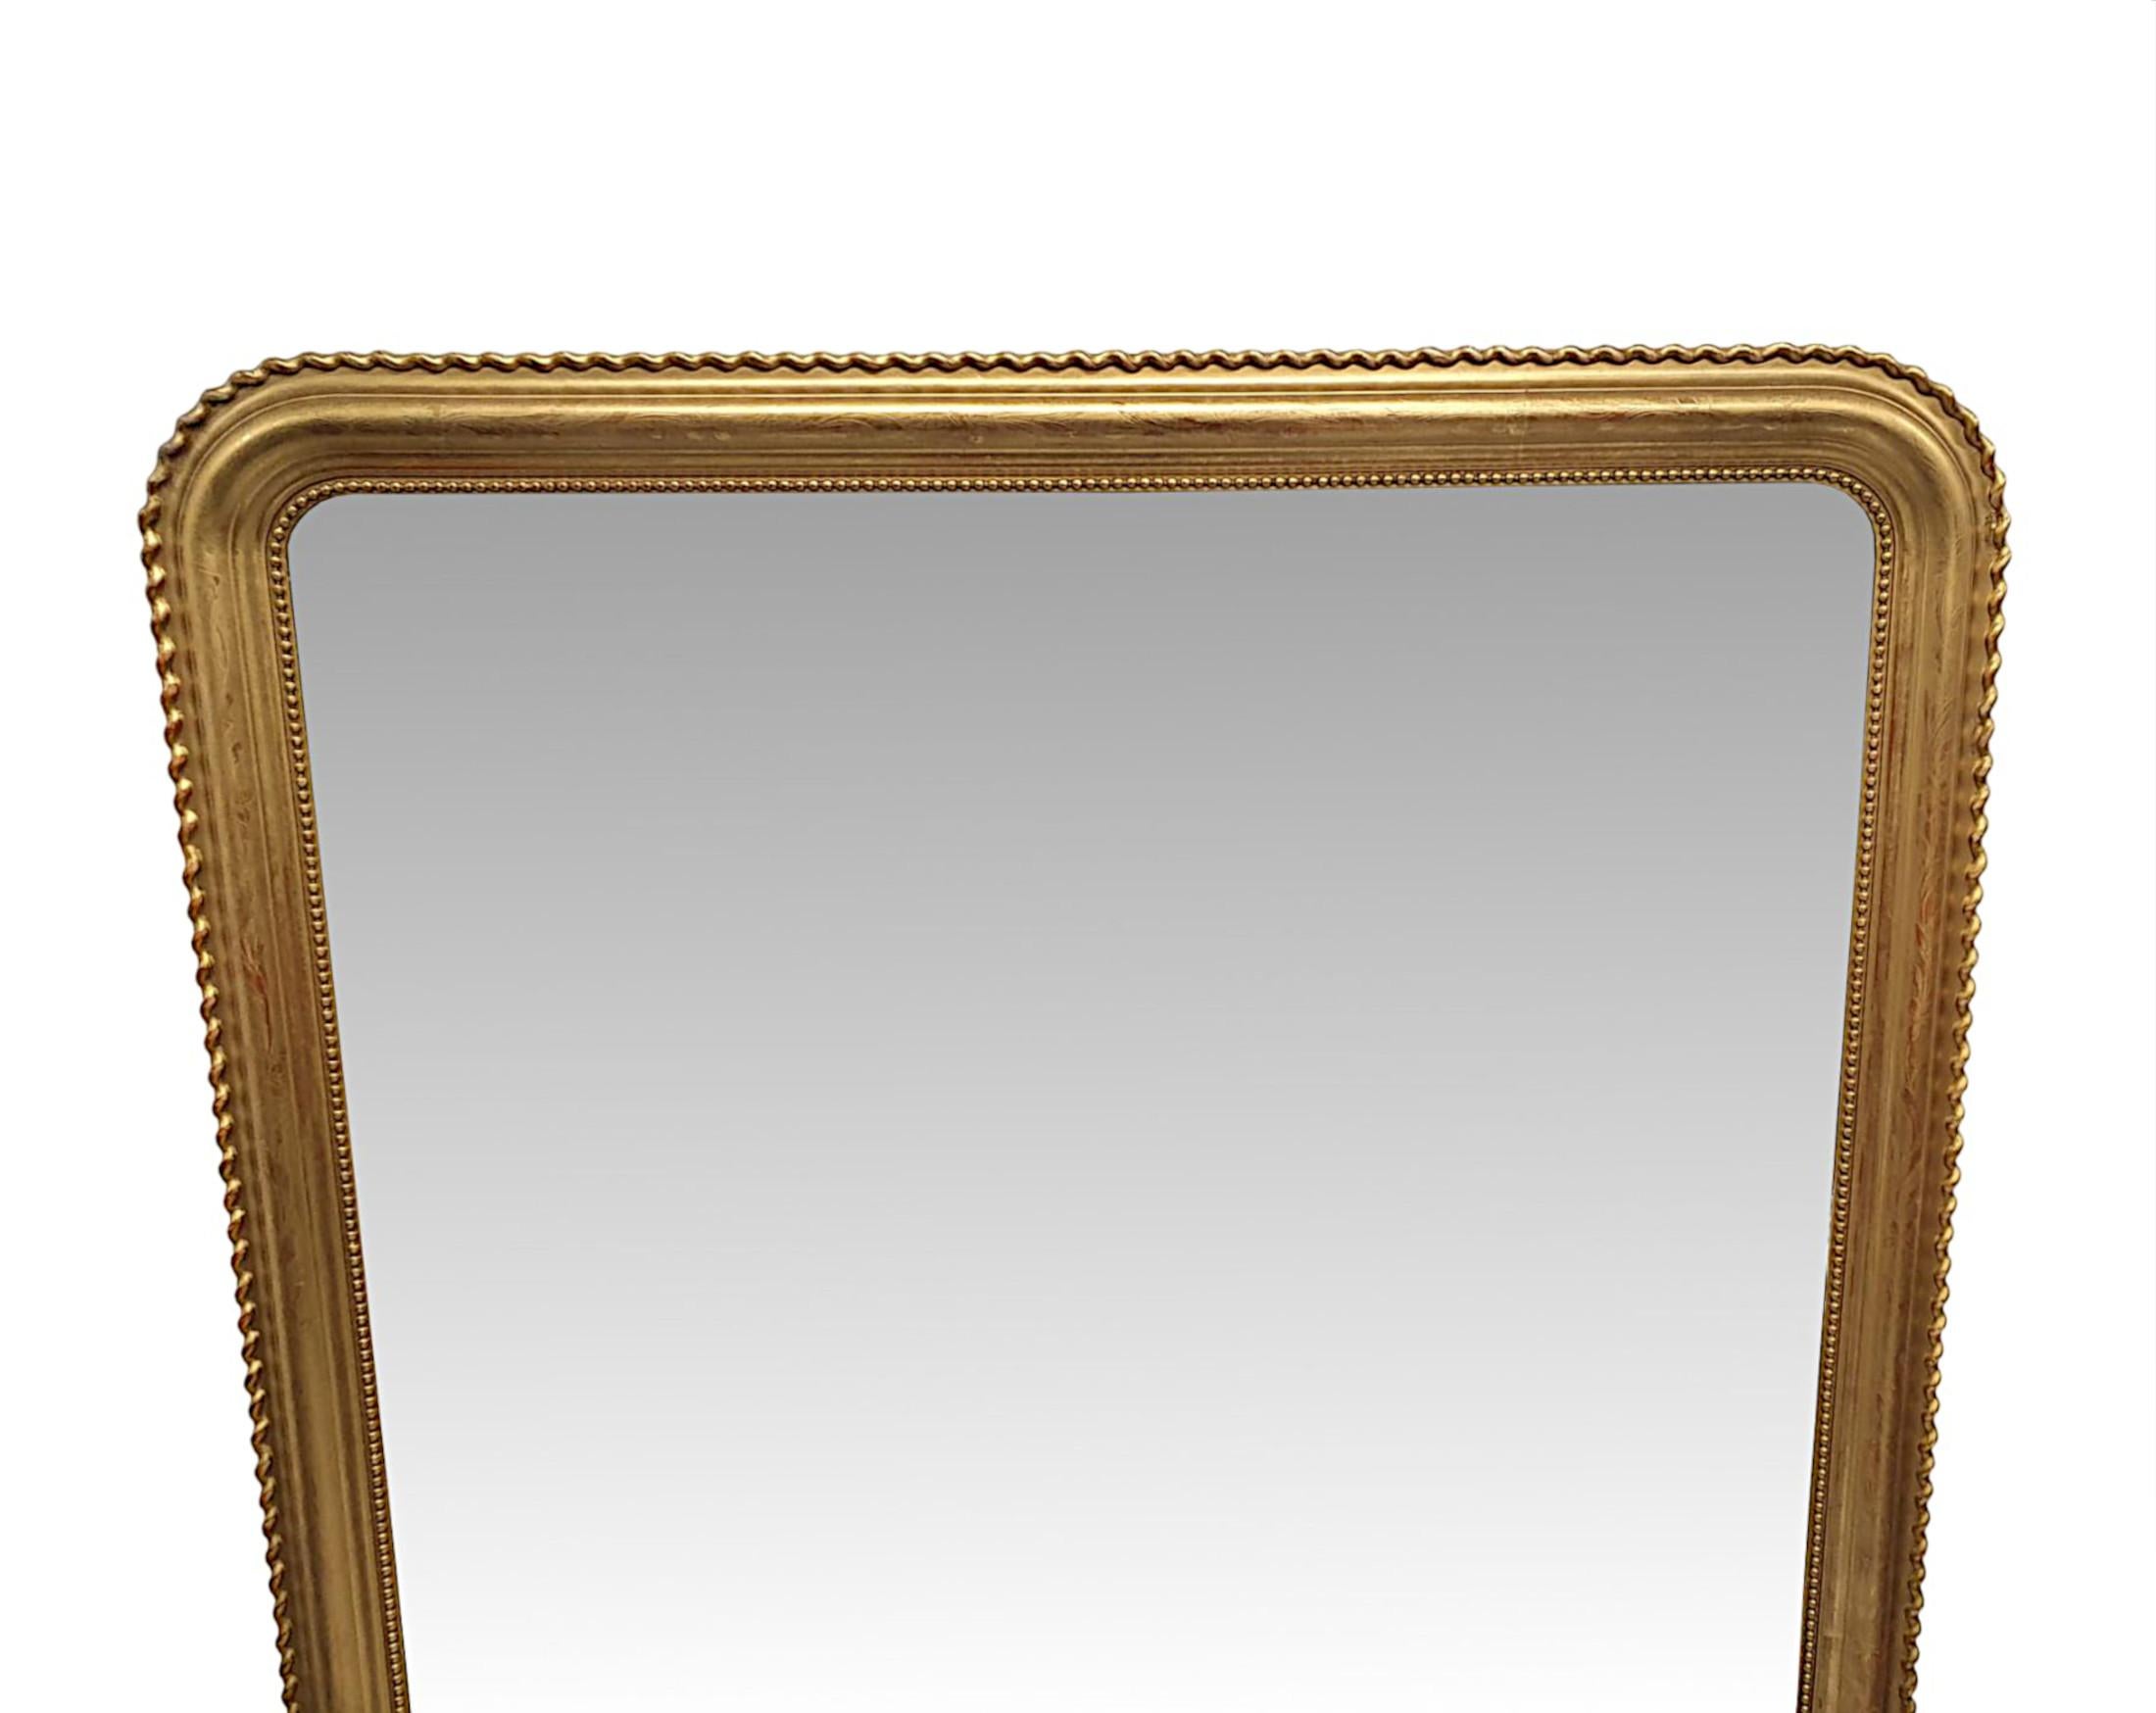 An impressive 19th century giltwood overmantle mirror of extremely large proportions. The mirror glass plate of rectangular form with curved detail to the top corner returns is set within a finely hand carved and beautifully simple, moulded and